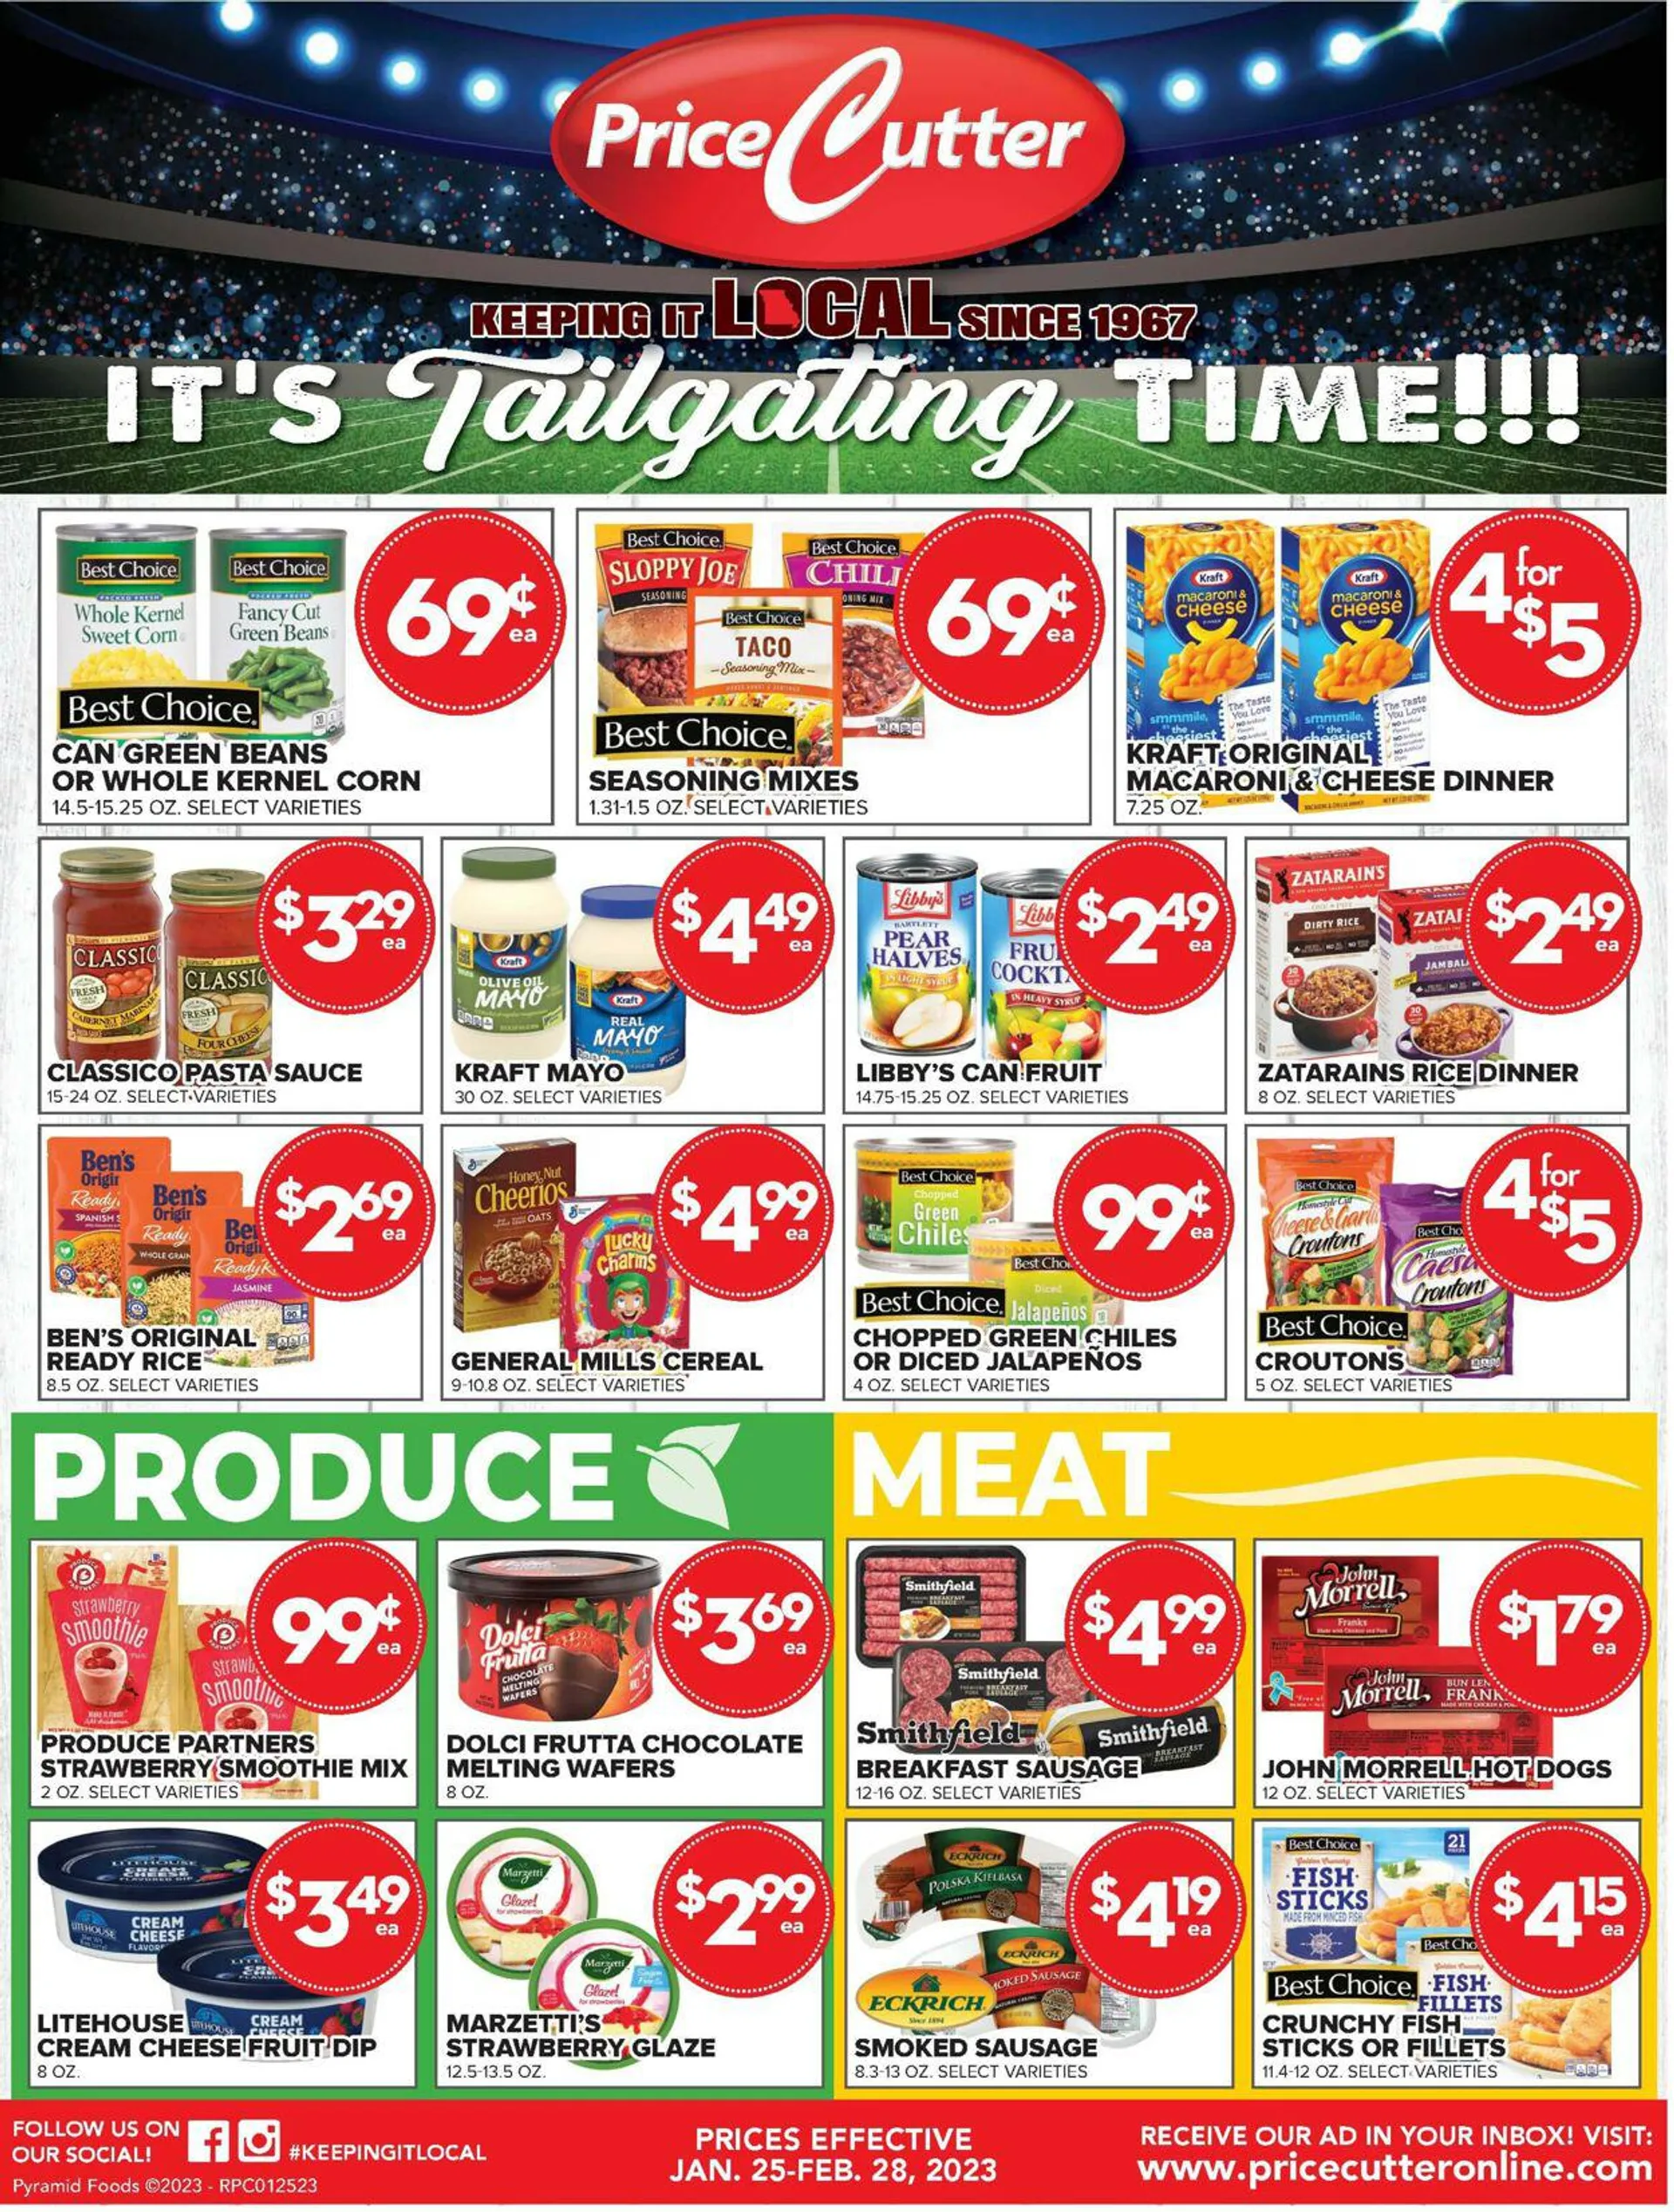 Price Cutter Current weekly ad - 1